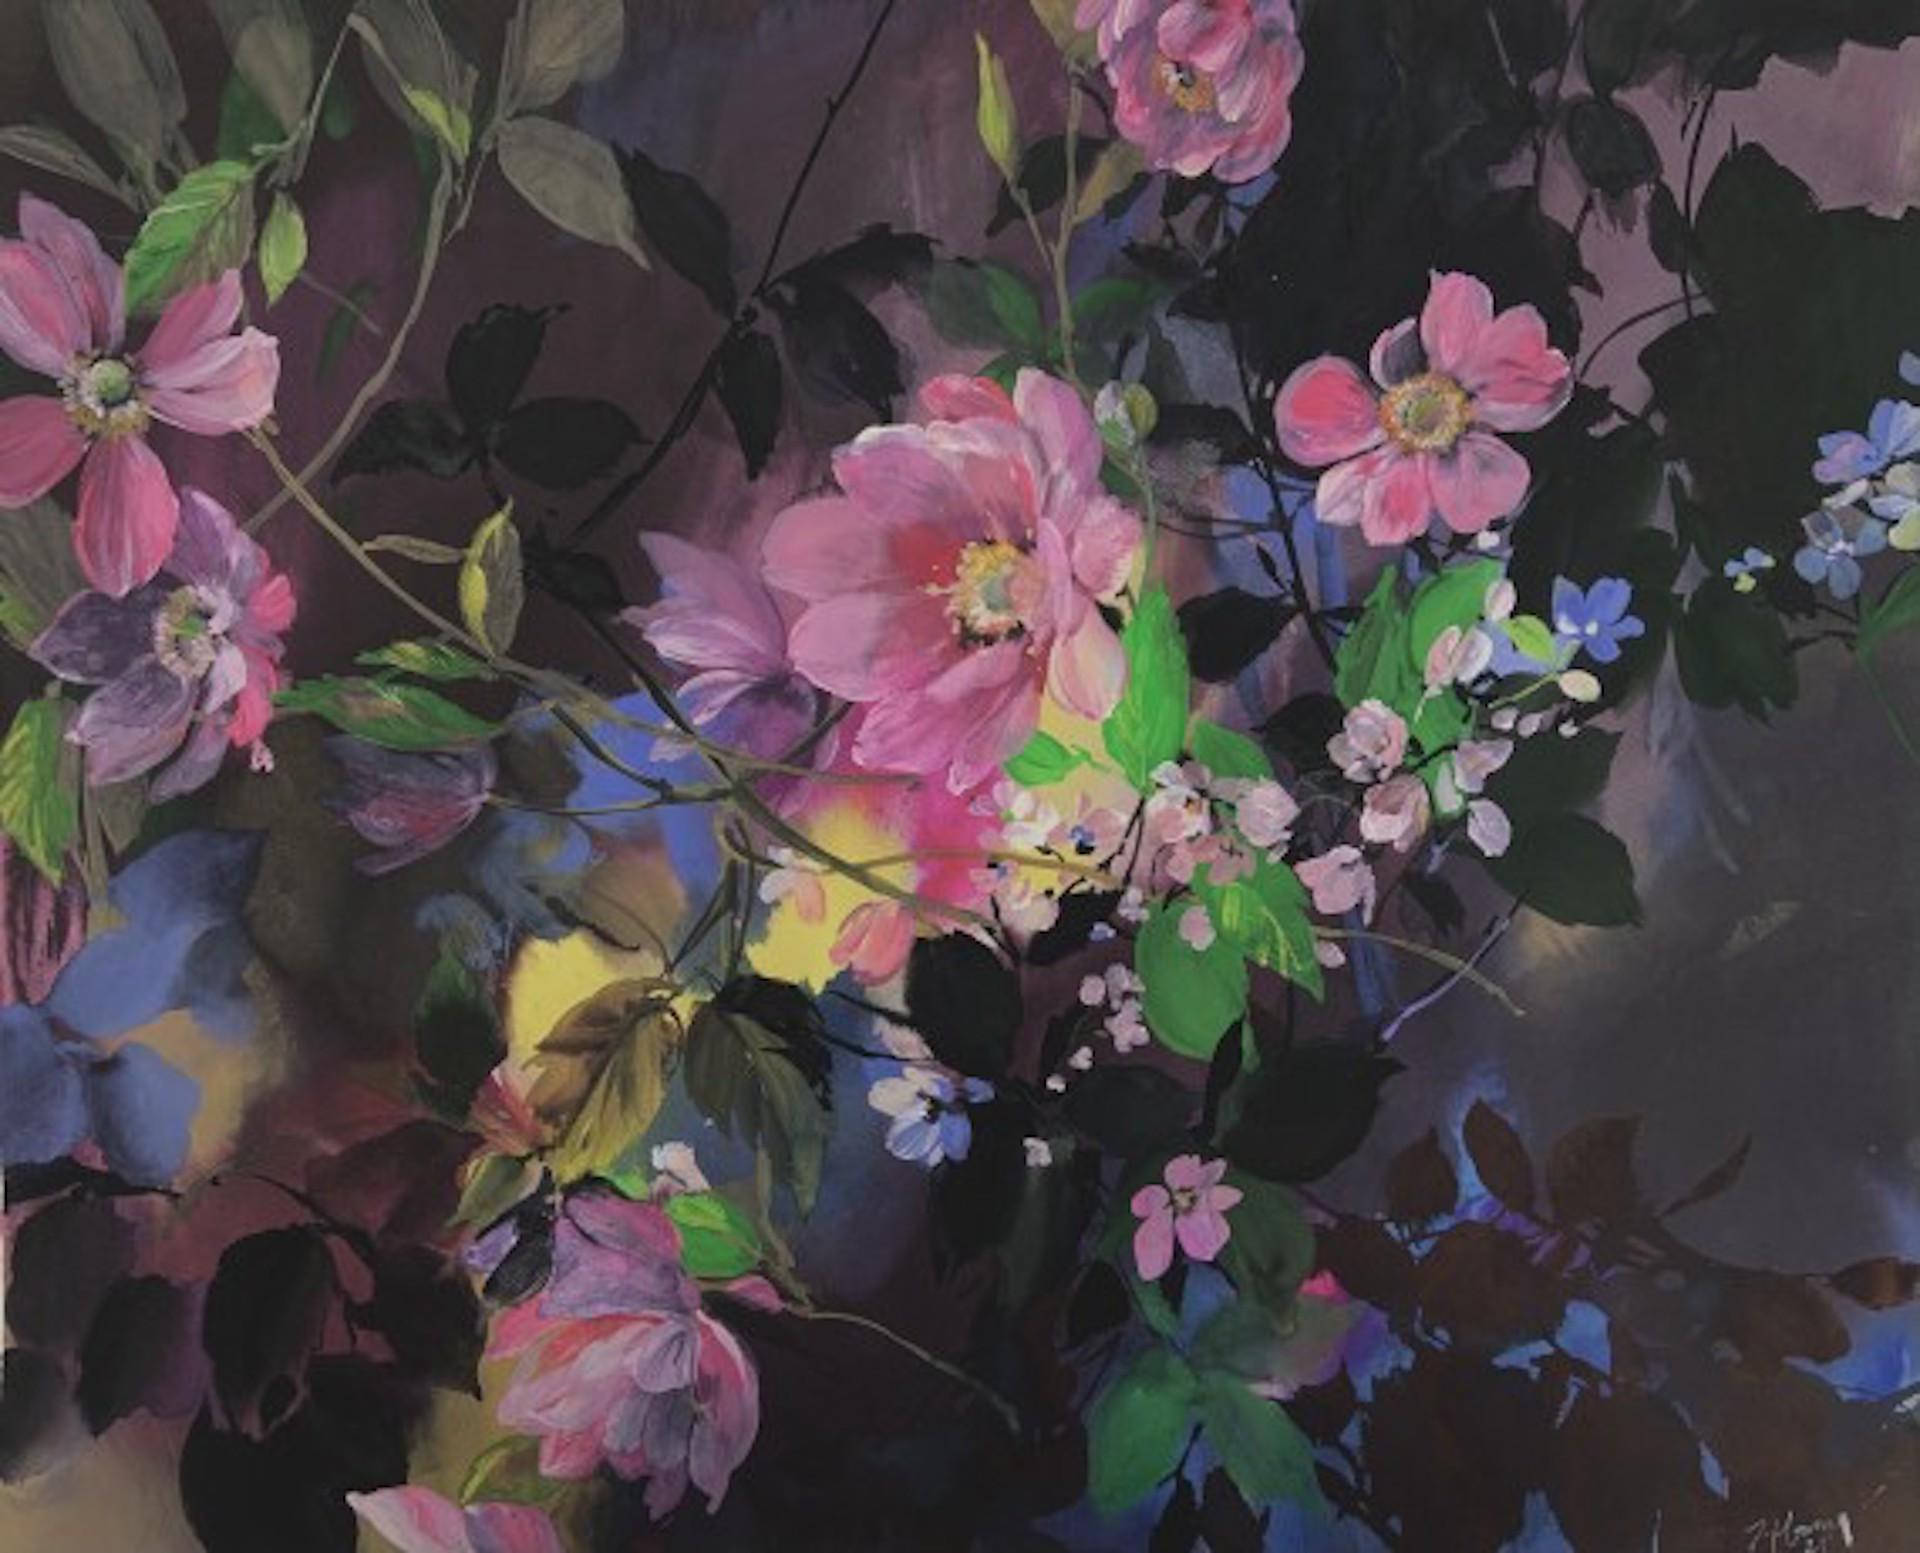 Jo Haran, Jewel Heads in Darkness, Art floral contemporain, Art abordable